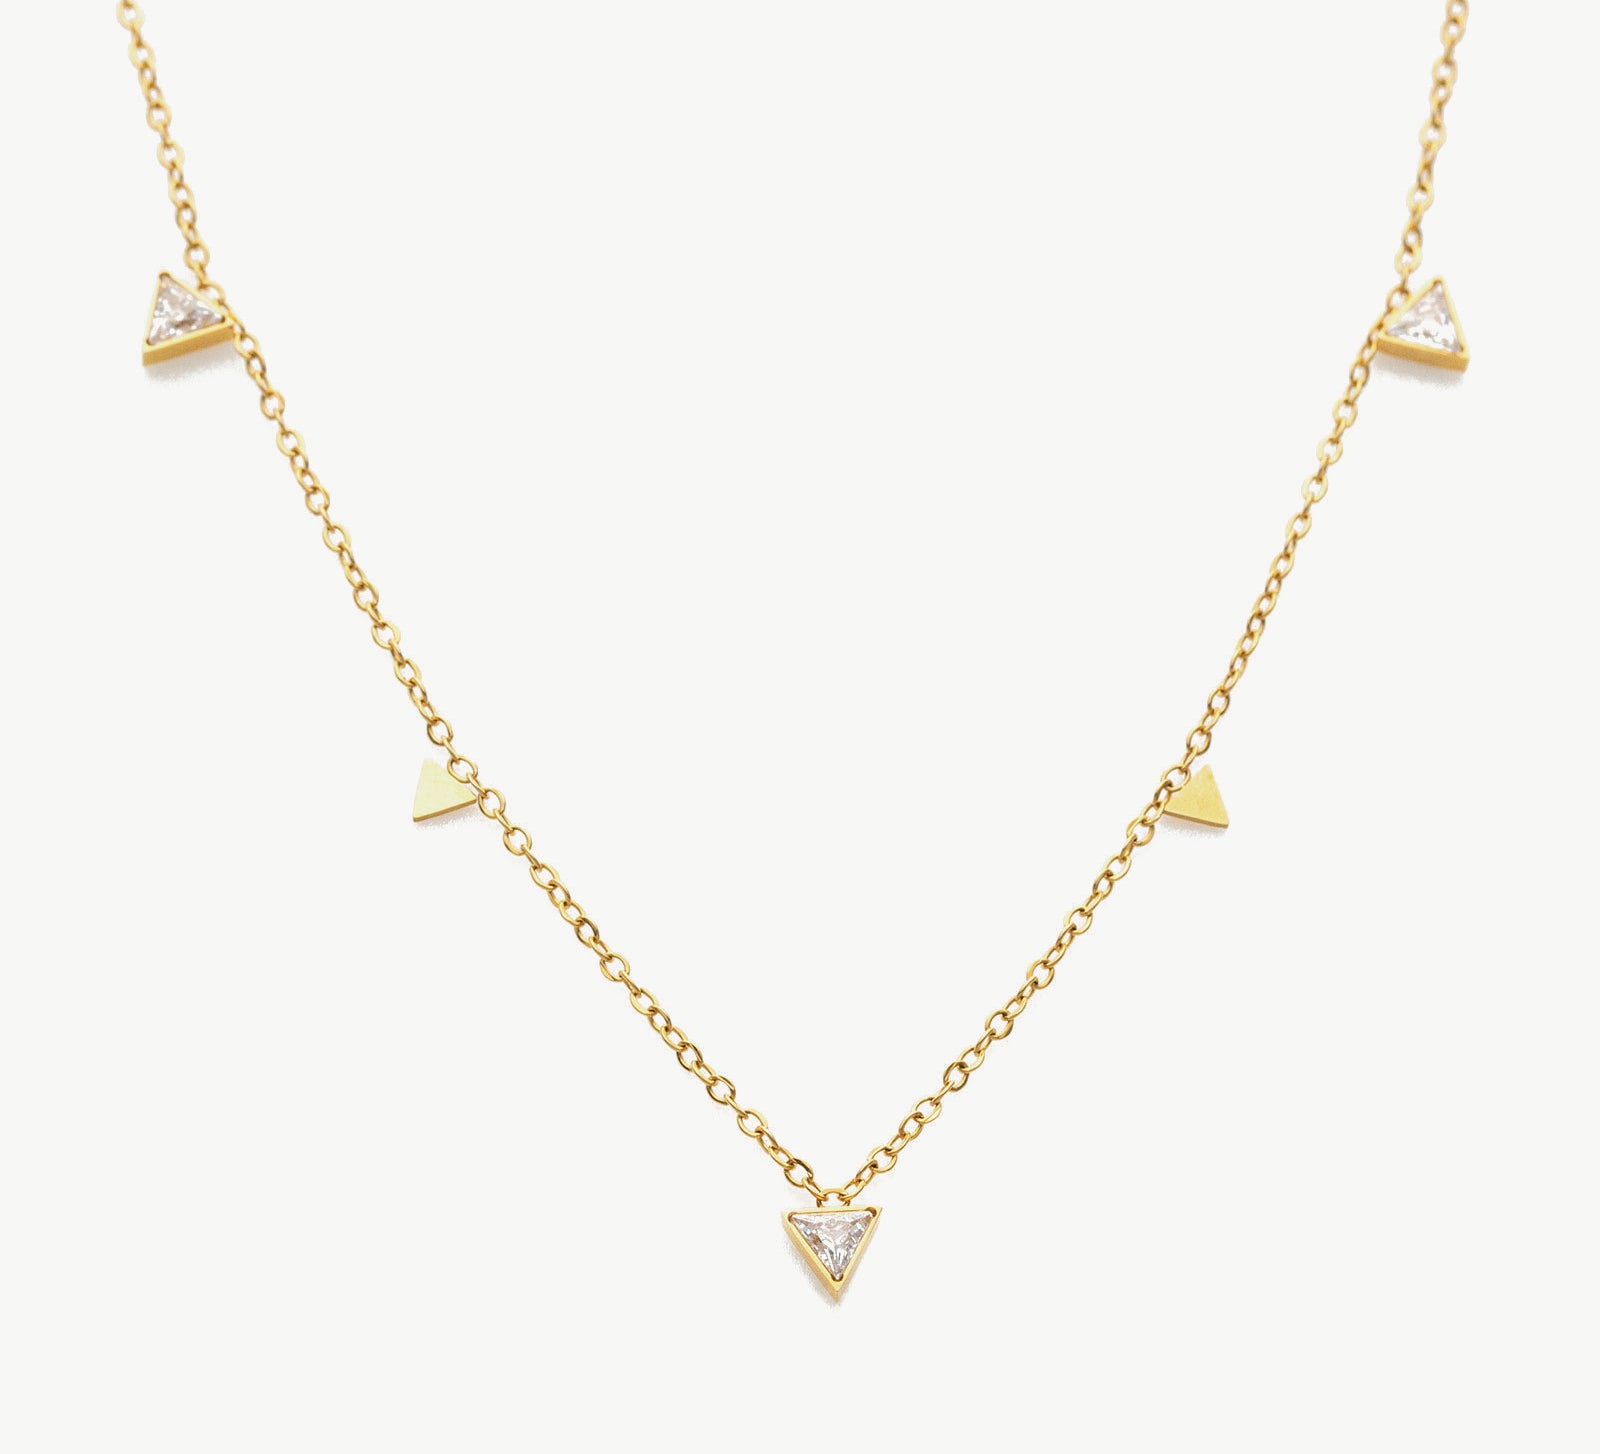 Diamond Drop Necklace, a stunning piece featuring a delicate chain with a radiant diamond drop pendant, adding a touch of elegance and sophistication to your neckline.